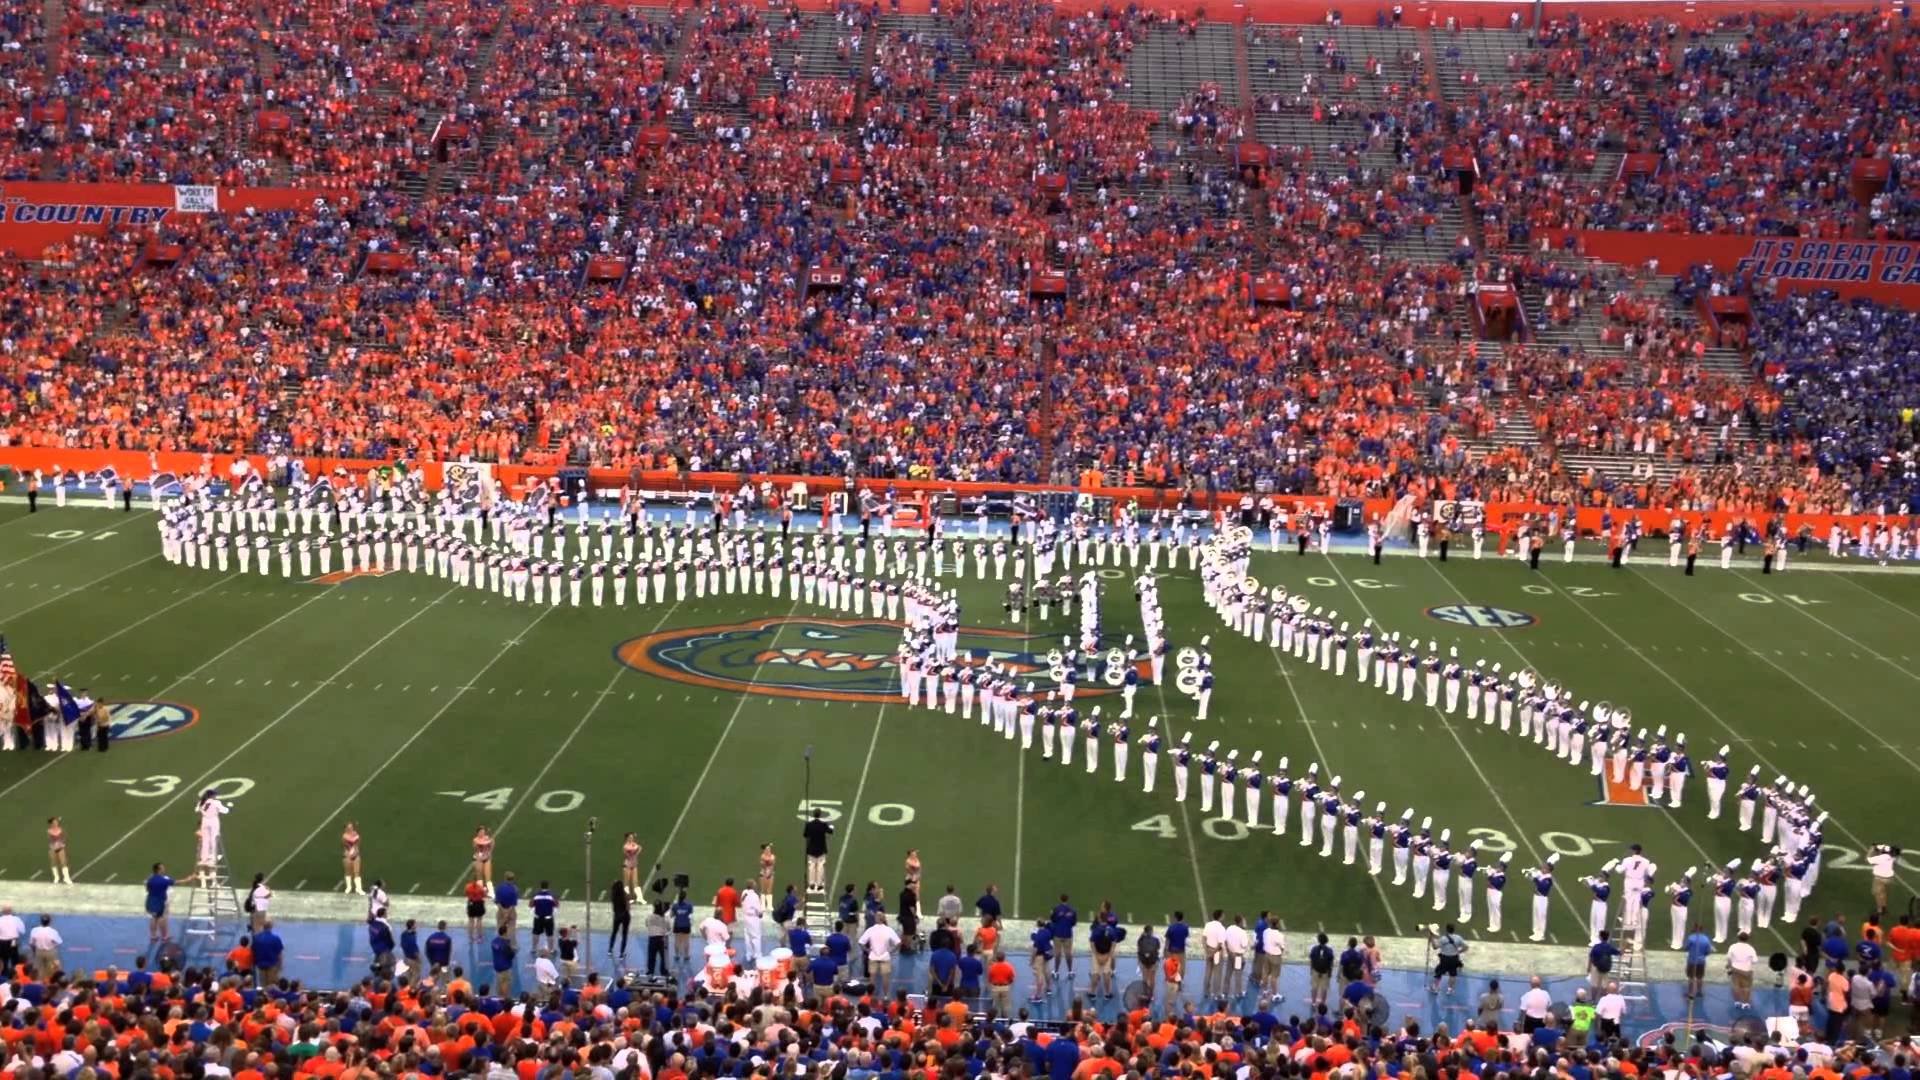 University Of Florida Marching Band 9 13 14 Game Part 2